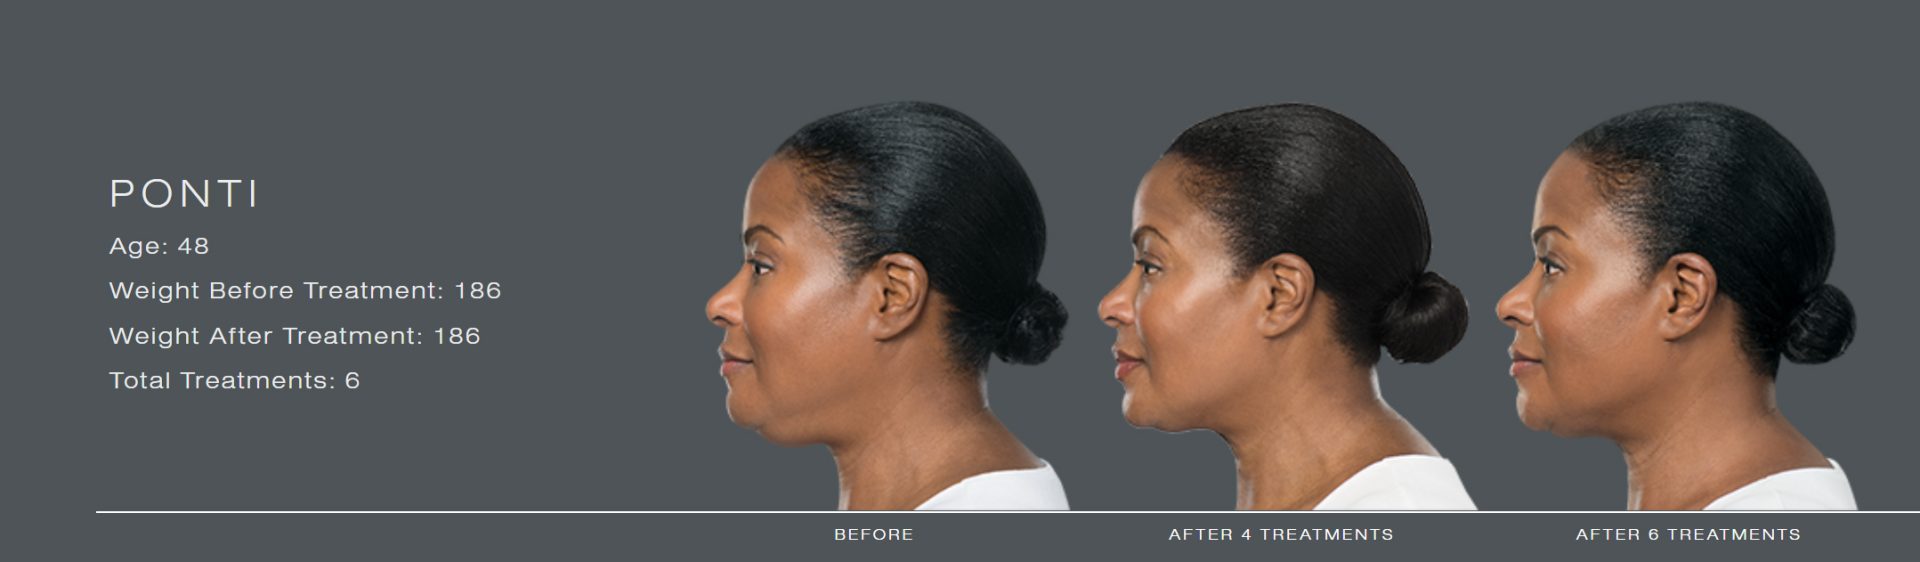 Kybella Injections for Chin Fat Reduction Before and After Photos